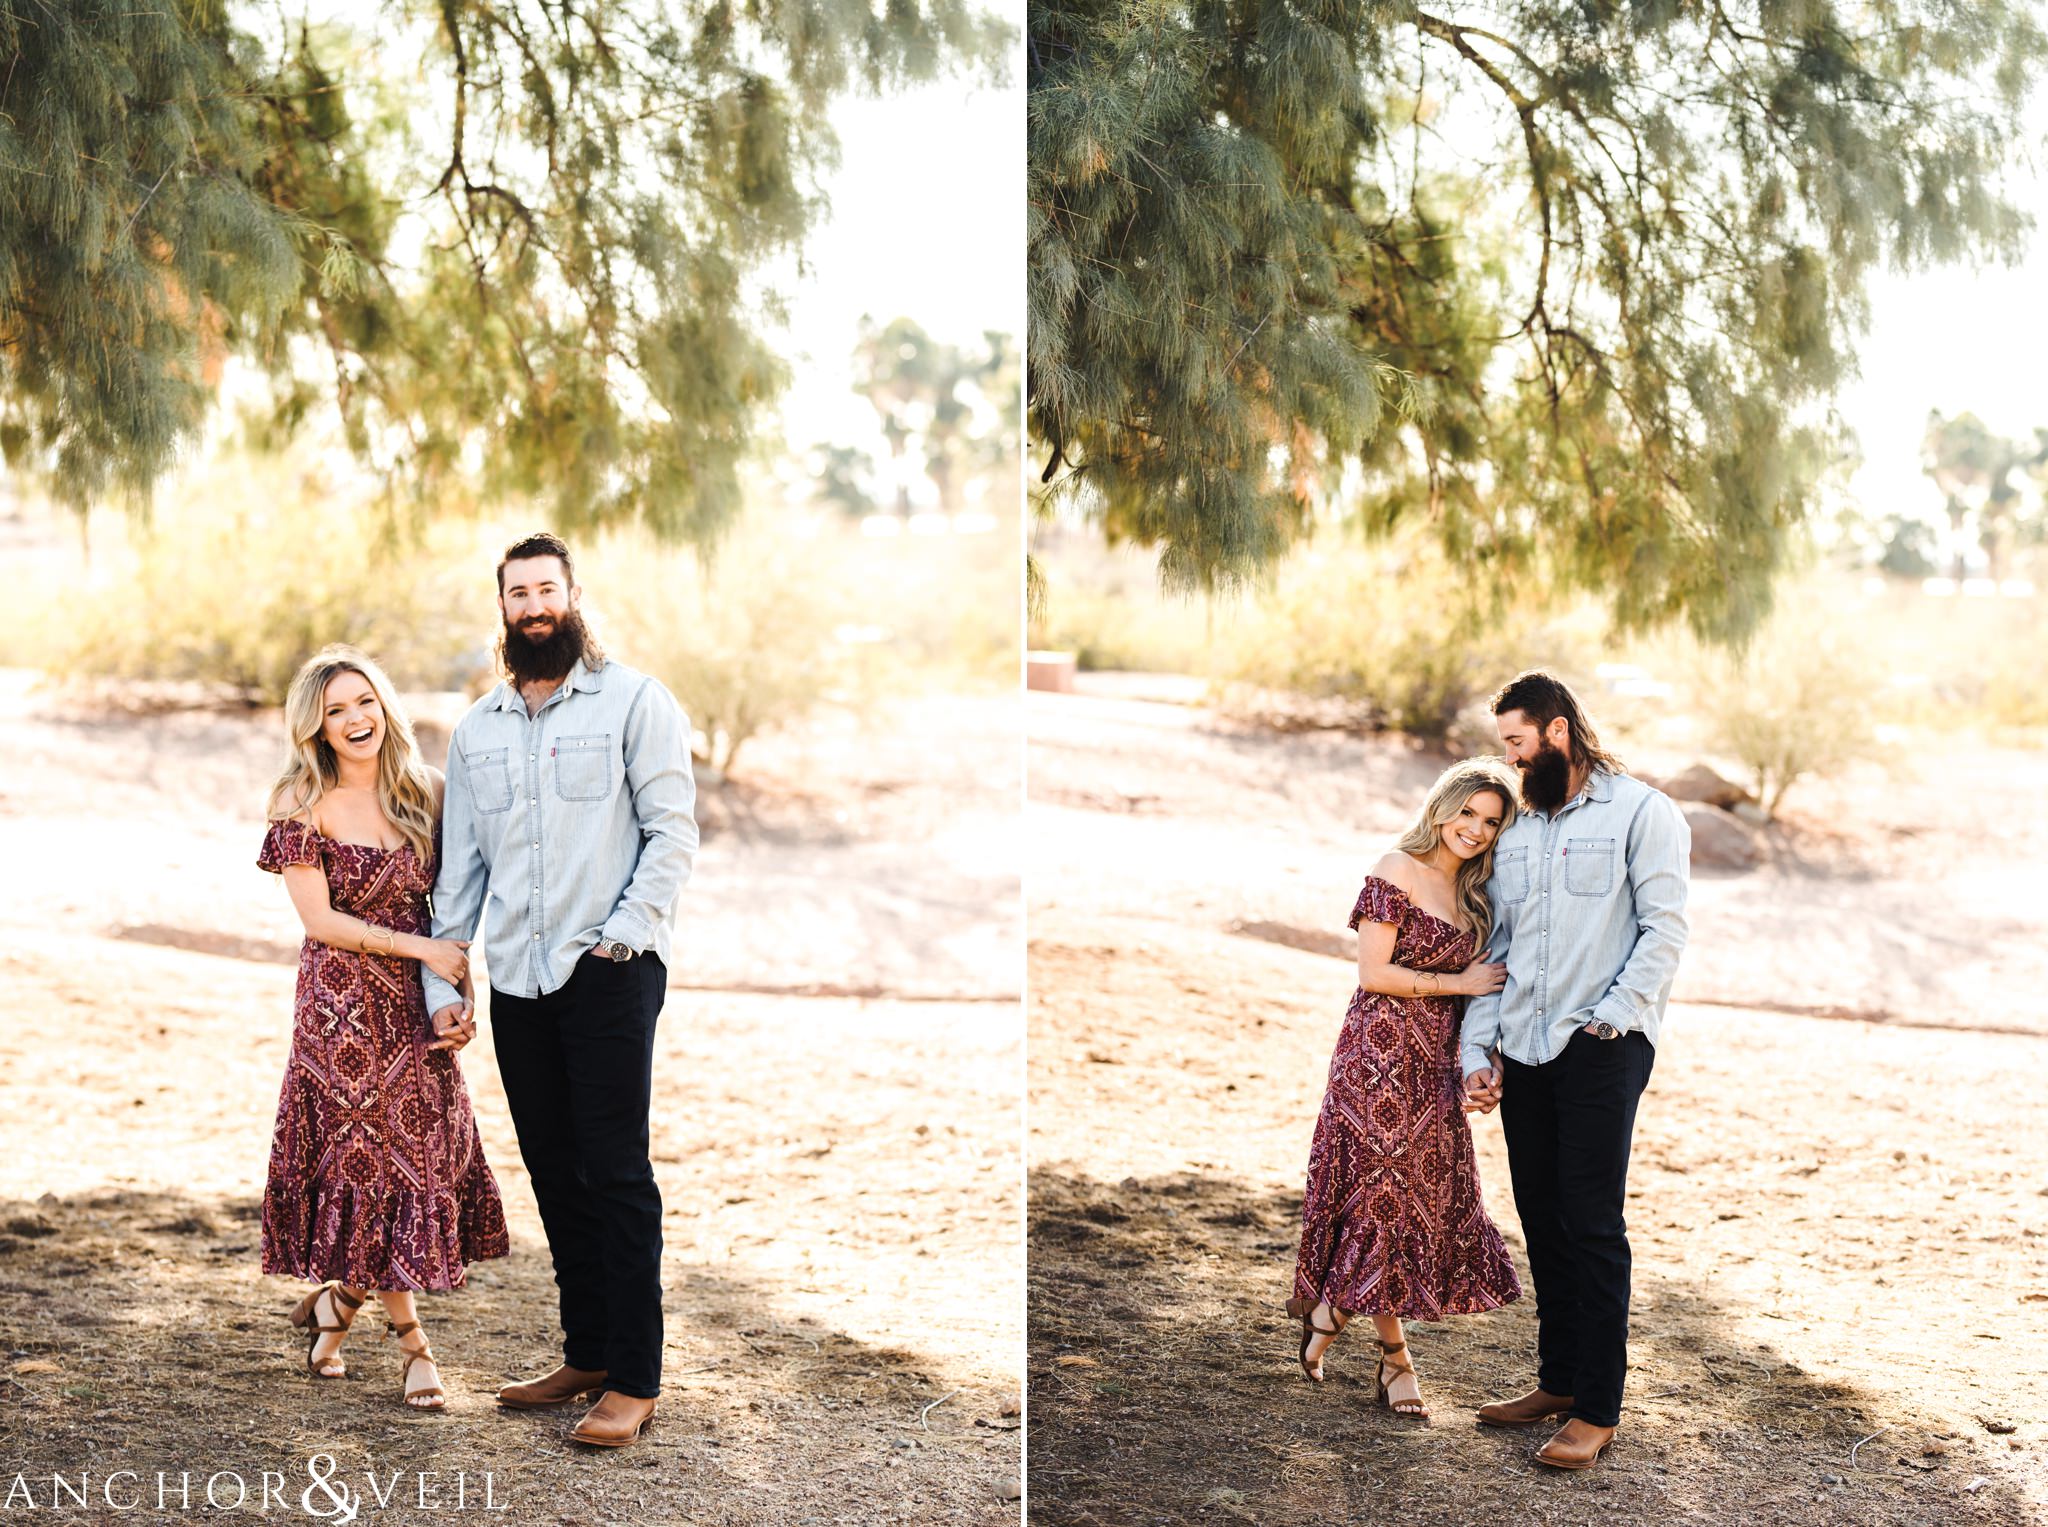 Charlie Blackmon holding her during their spring training Arizona Papago park engagement session